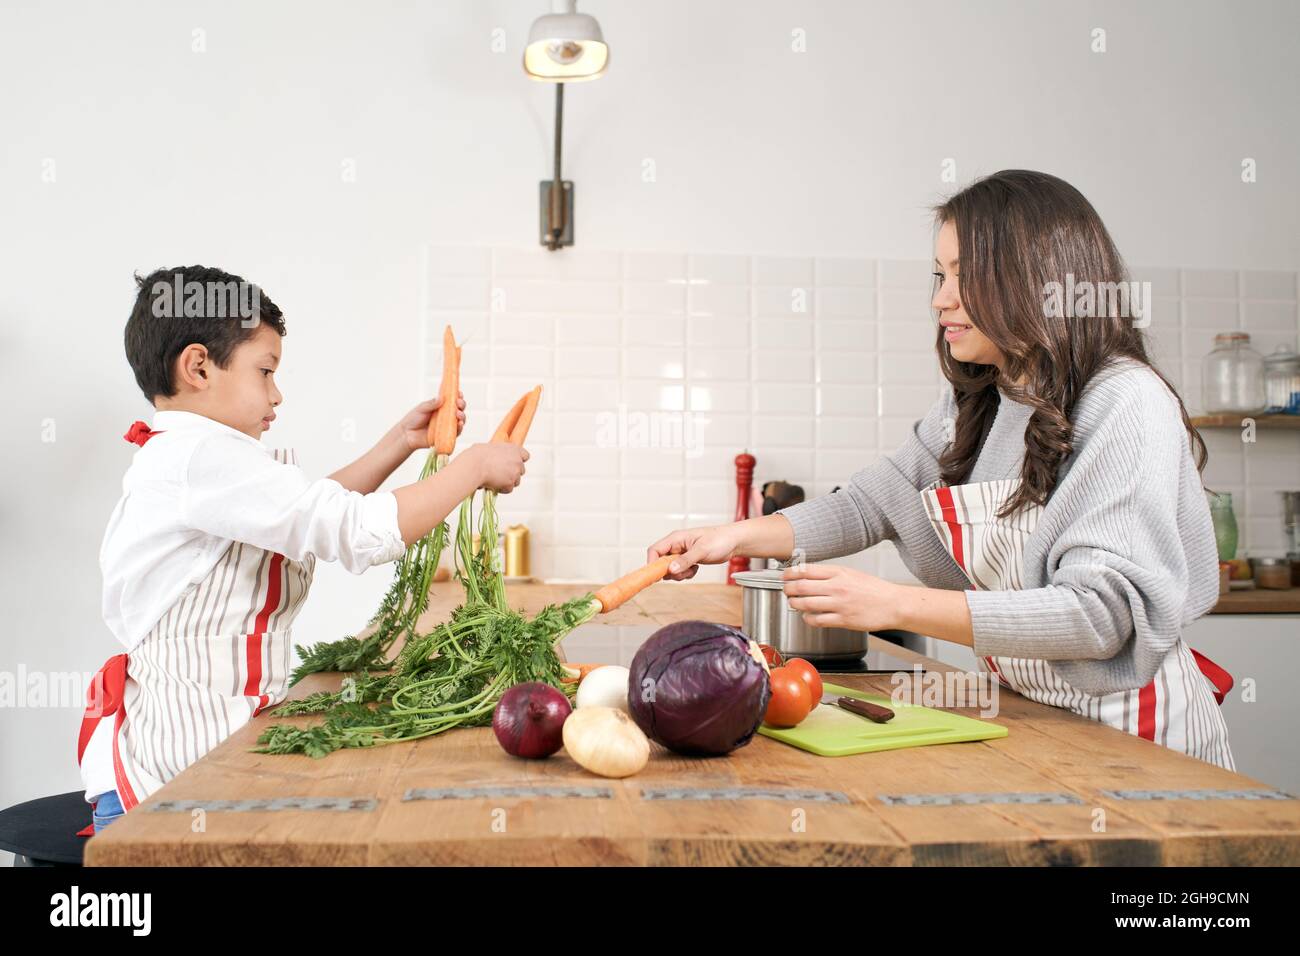 Bored child plays with some vegetables in the kitchen while mother is cooking. Healthy eating. Stock Photo